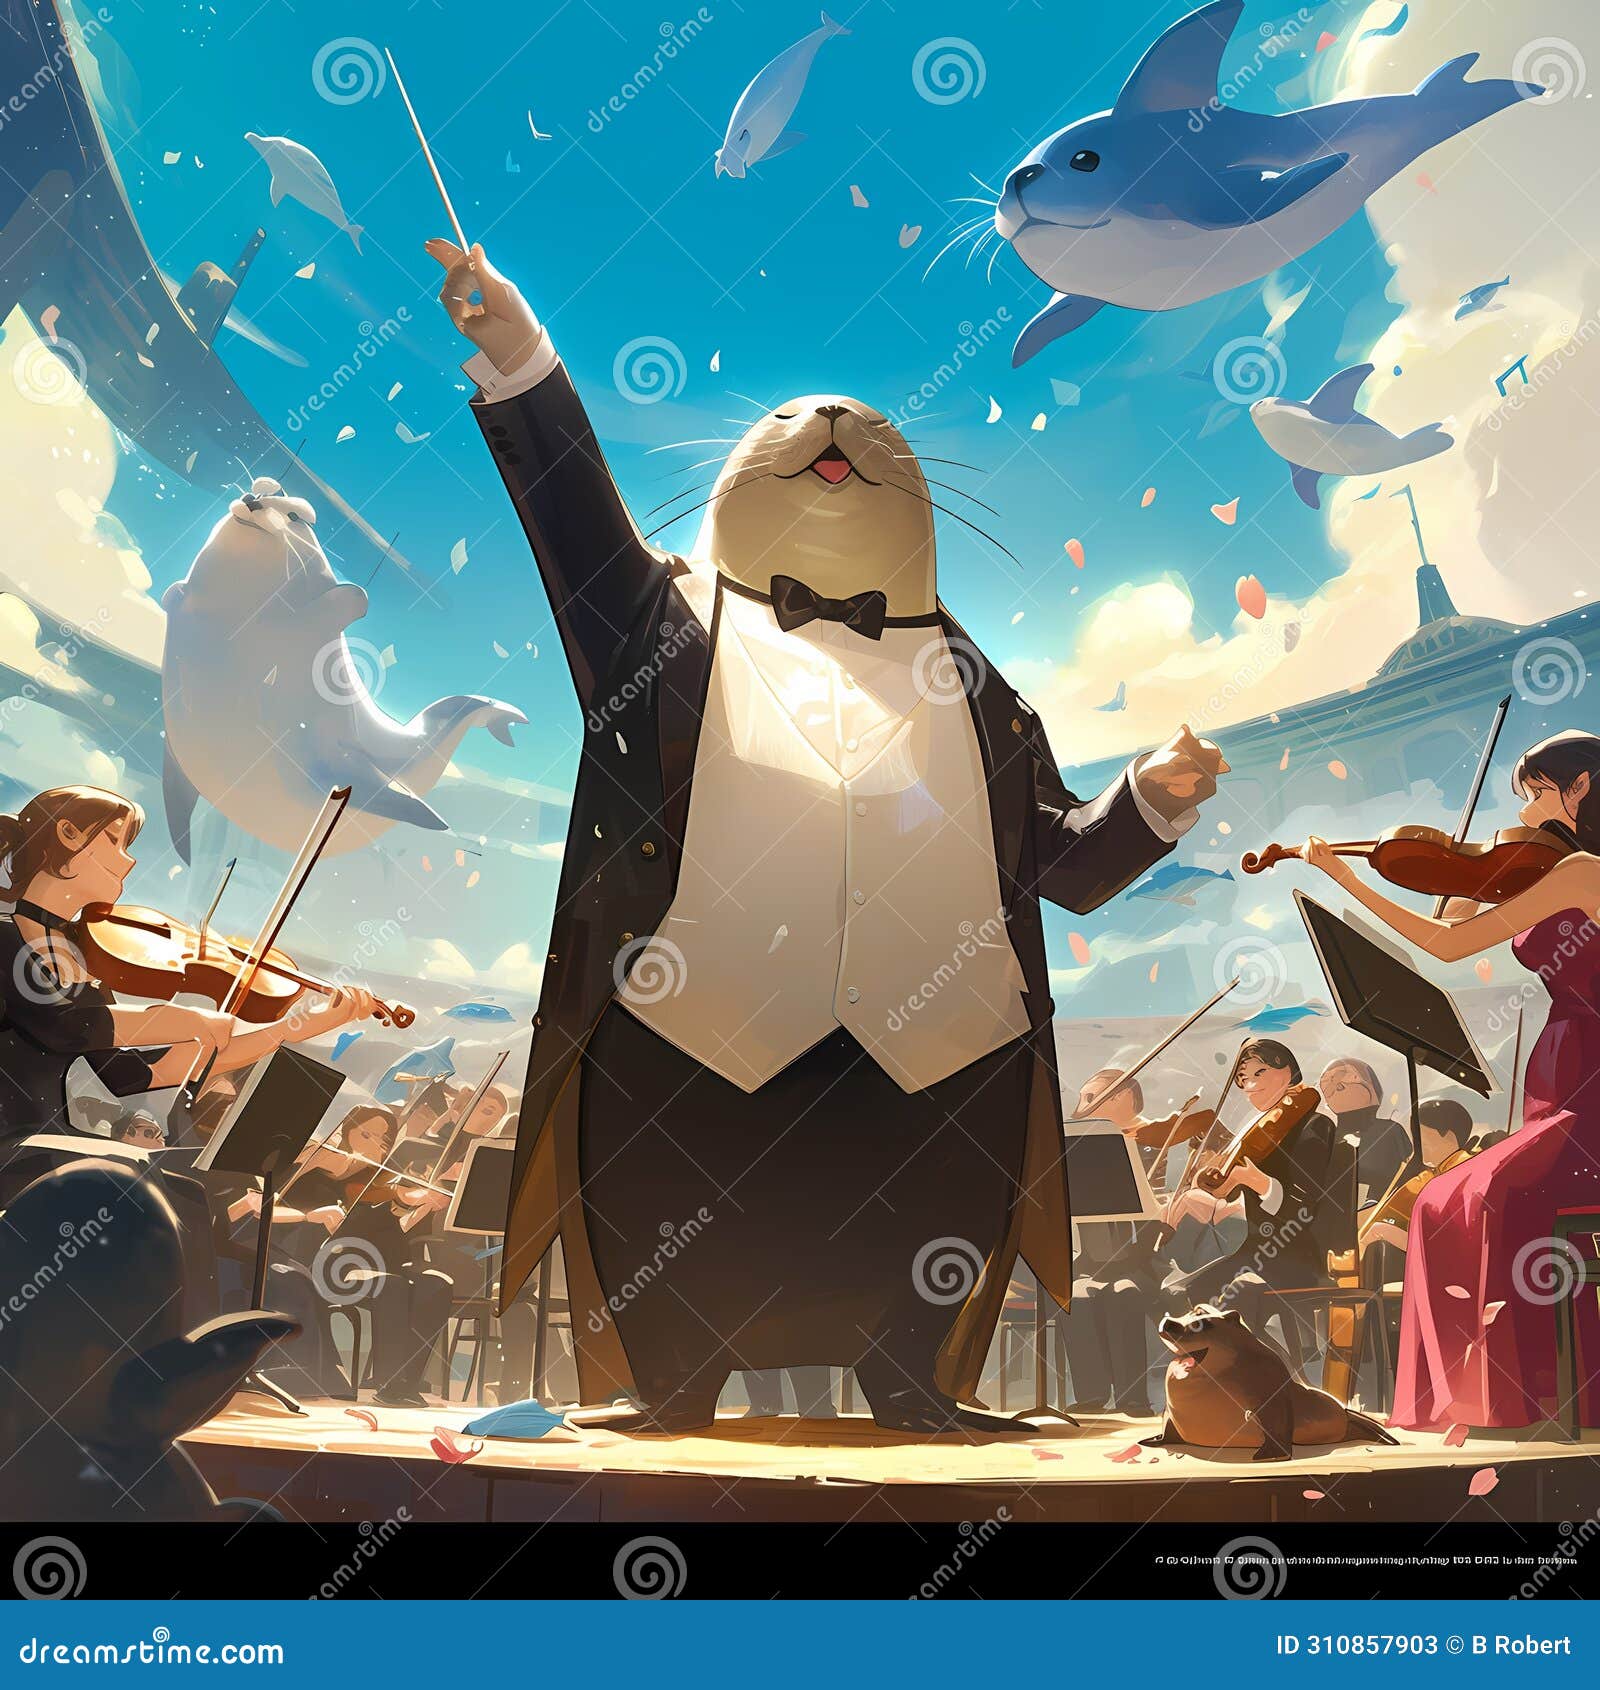 animated orchestral performance with pirate whale maestro